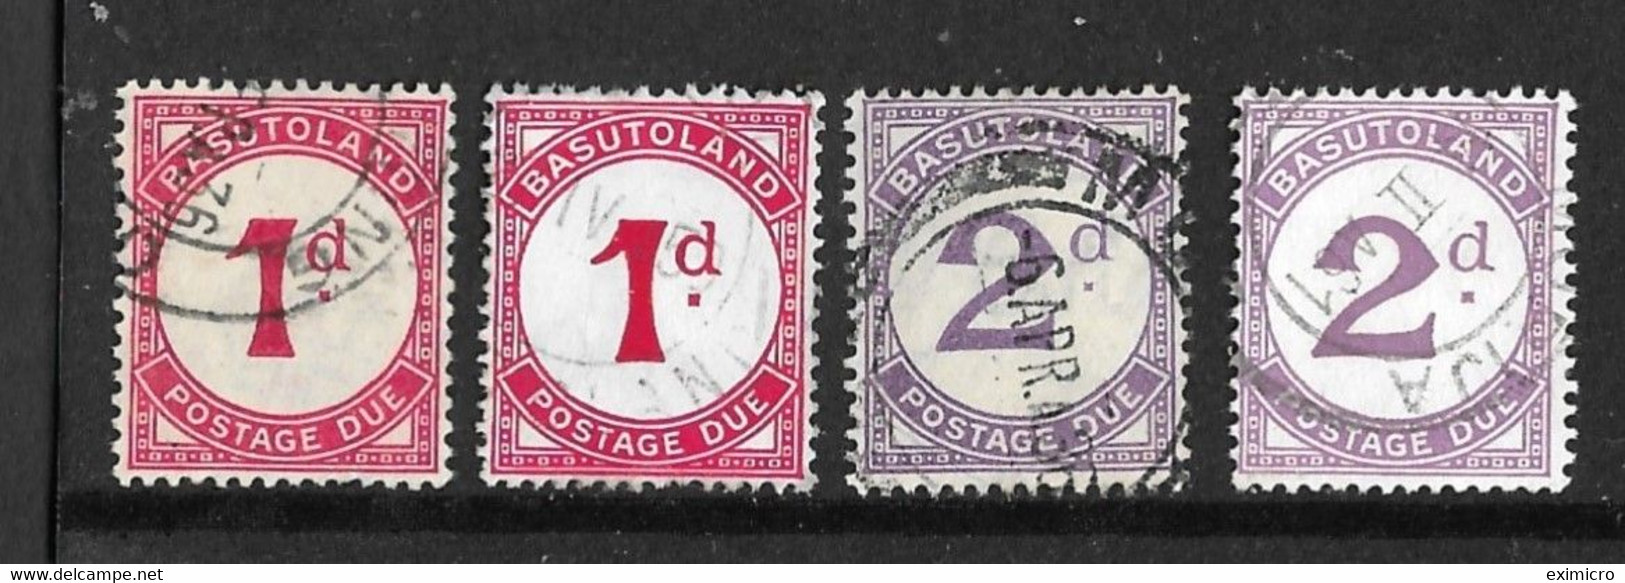 BASUTOLAND 1933 - 1952 POSTAGE DUE SET SG D1, D1b, D2, D2a BOTH ORDINARY AND CHALK-SURFACED PAPERS FINE USED Cat £92 - Segnatasse